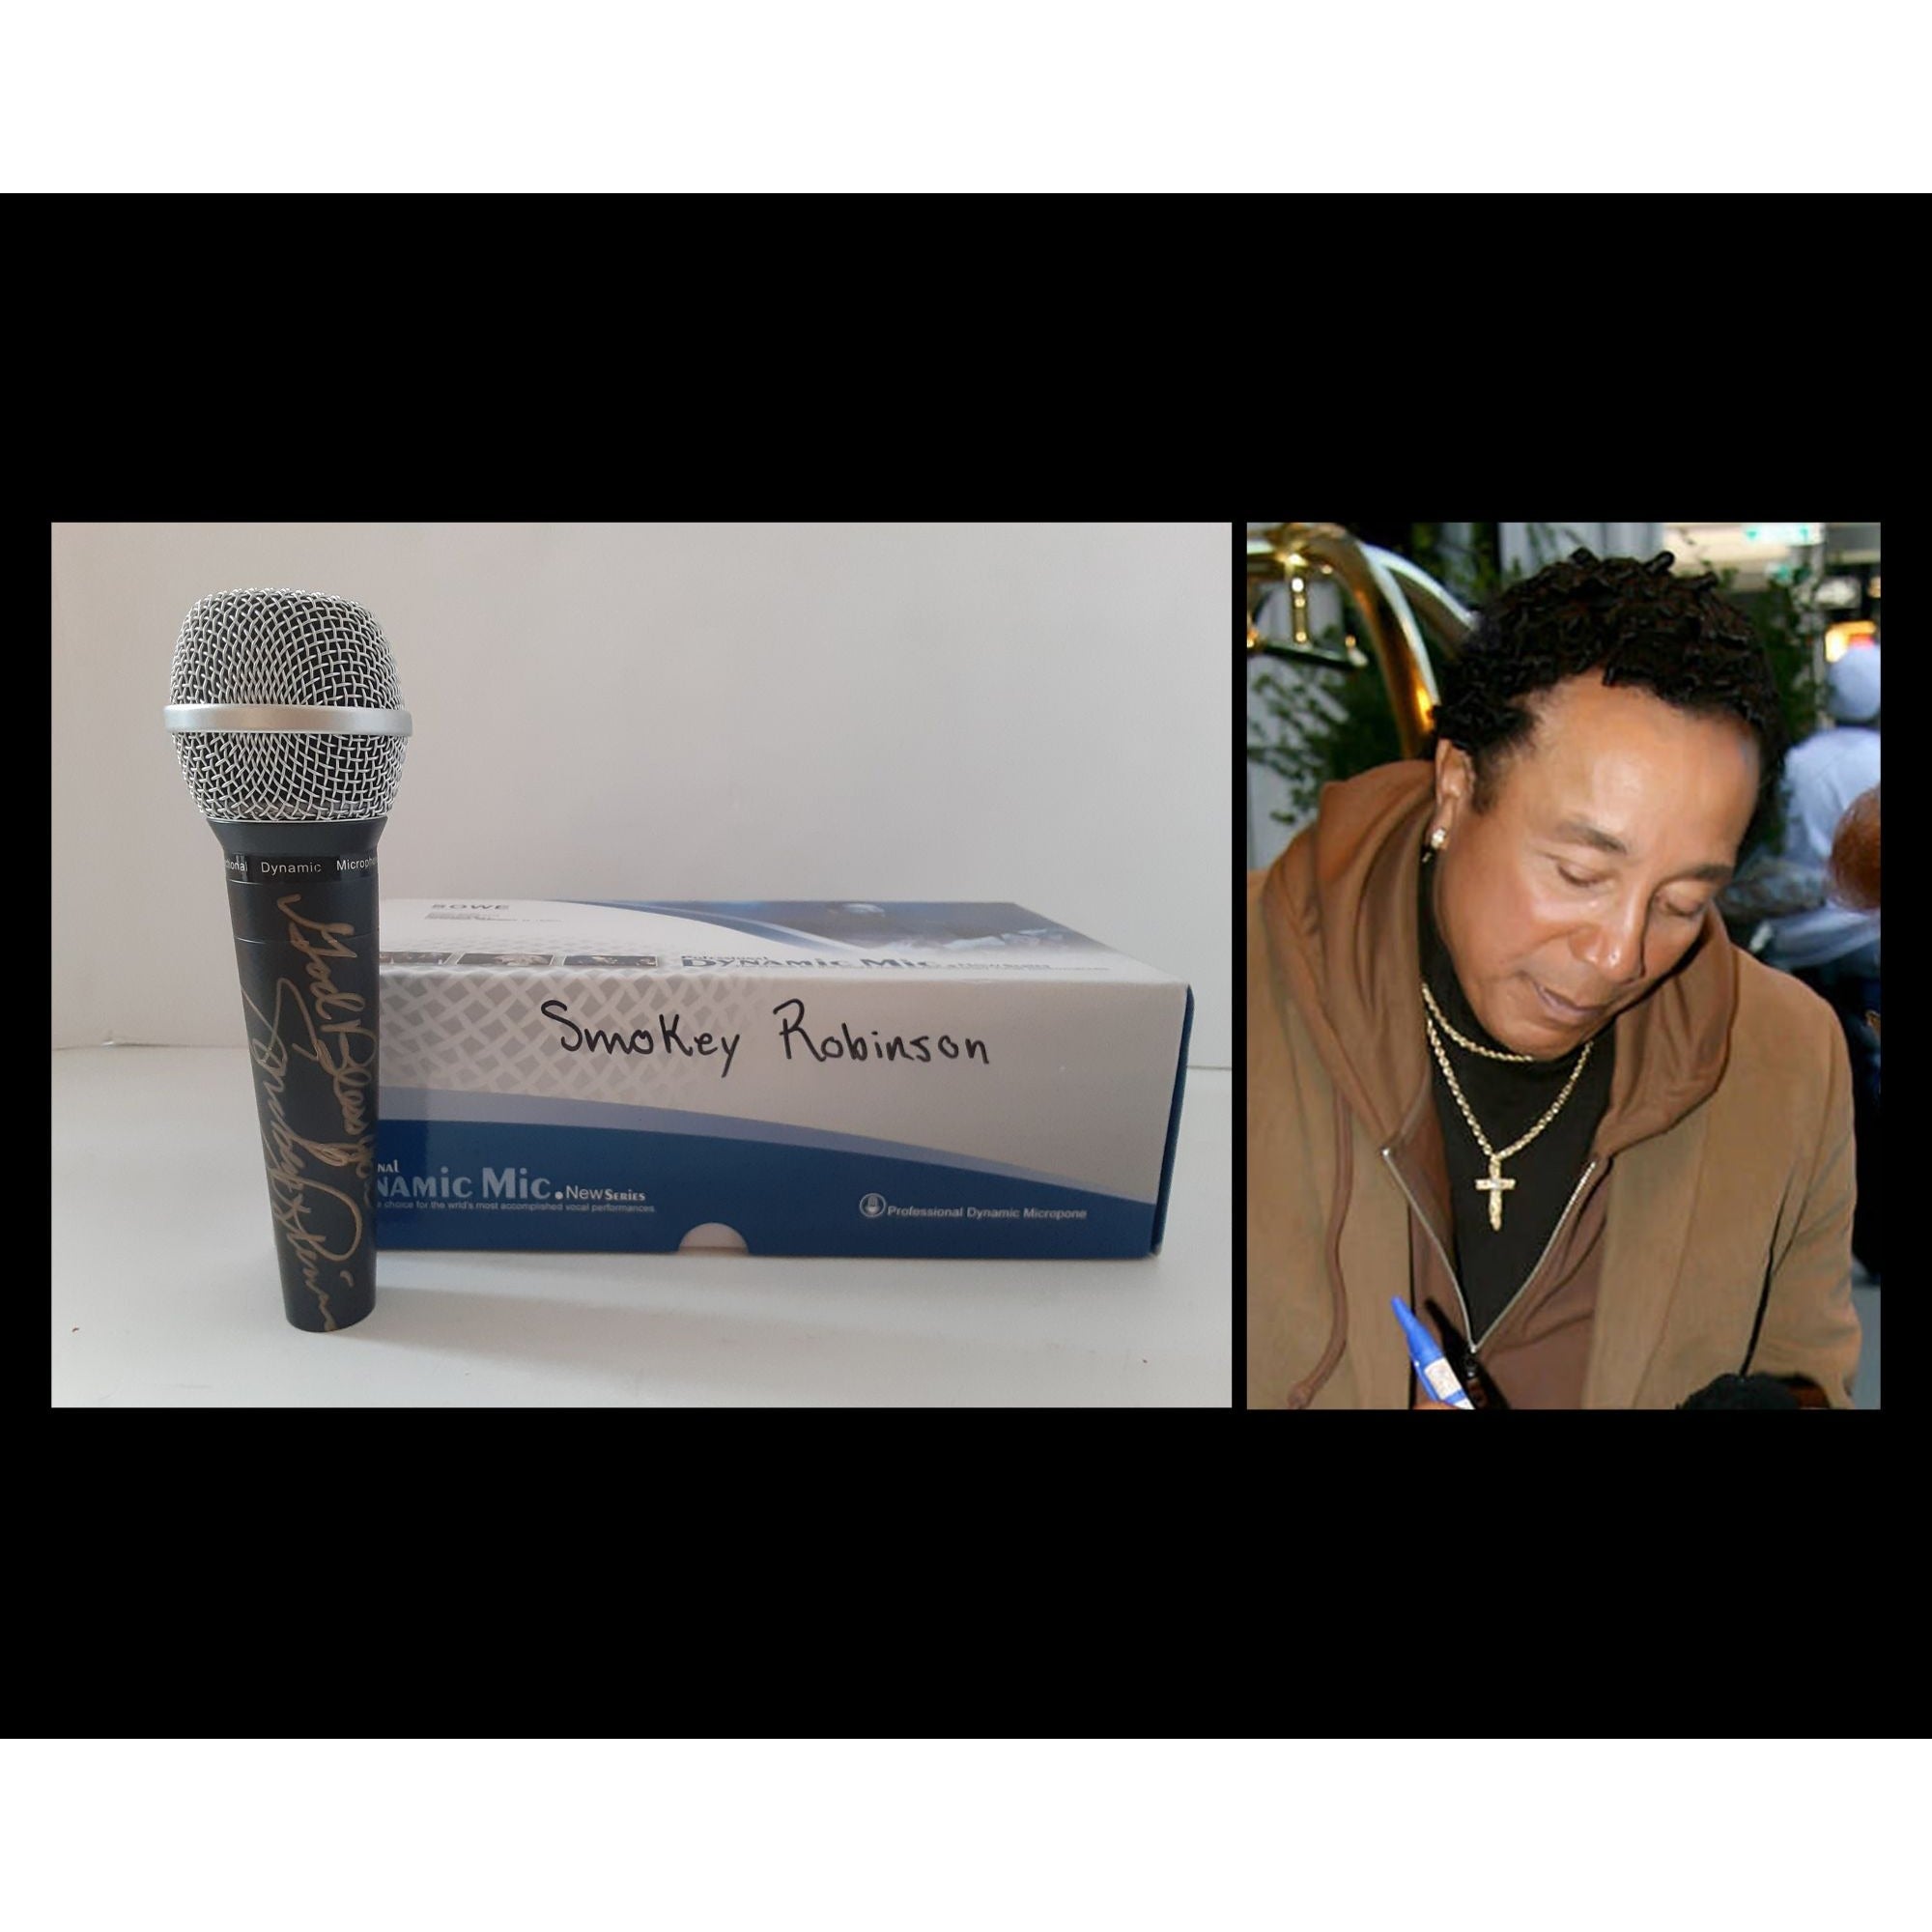 Smokey Robinson  microphone signed with proof